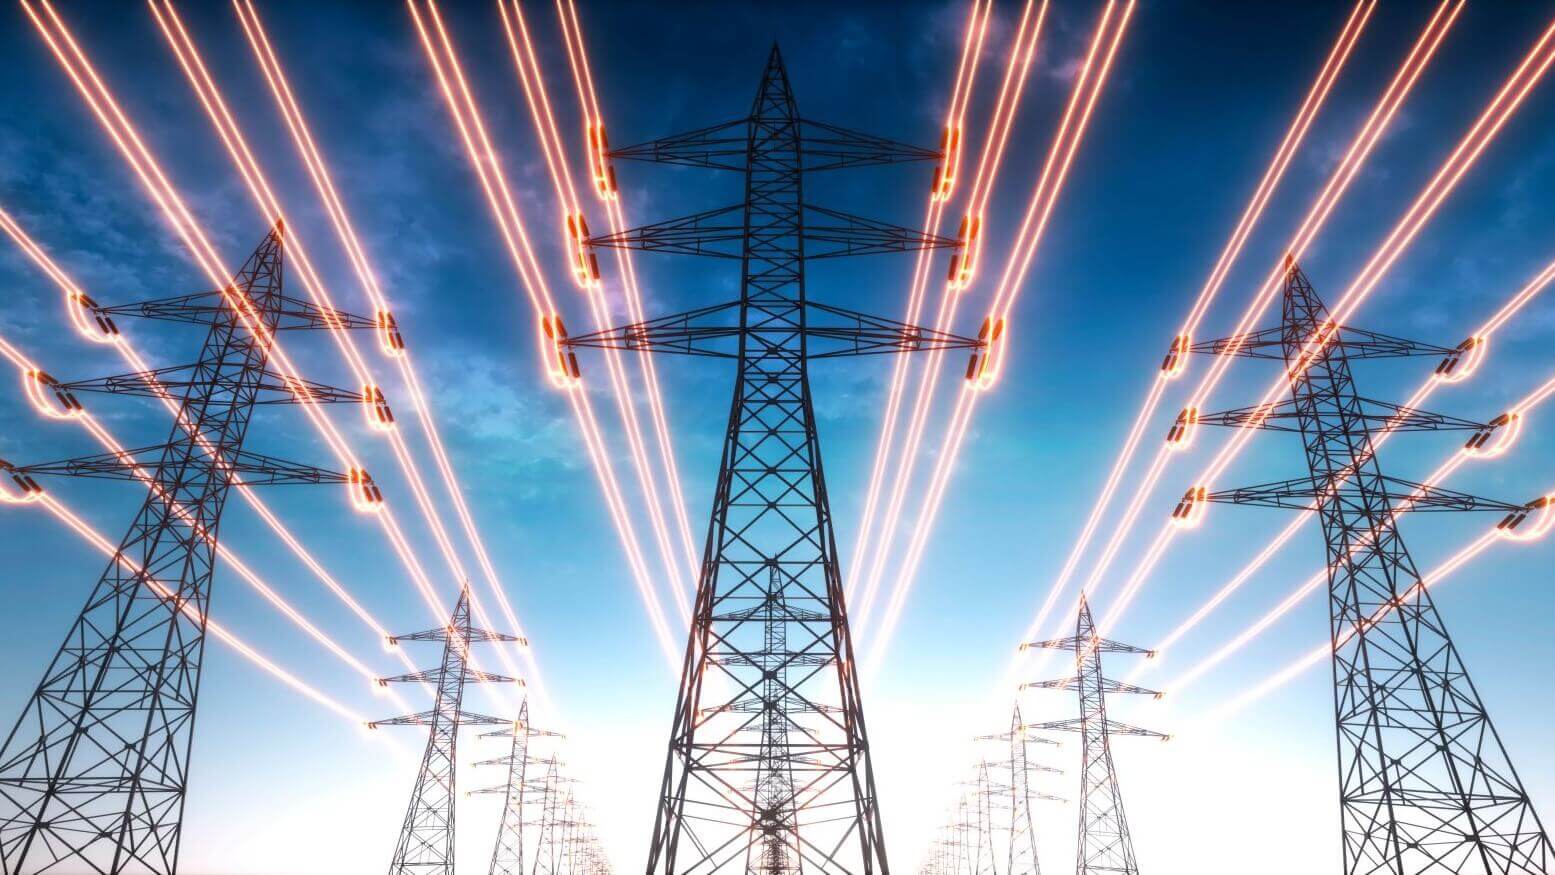 Graphic of a group of pylons with glowing cables connecting them